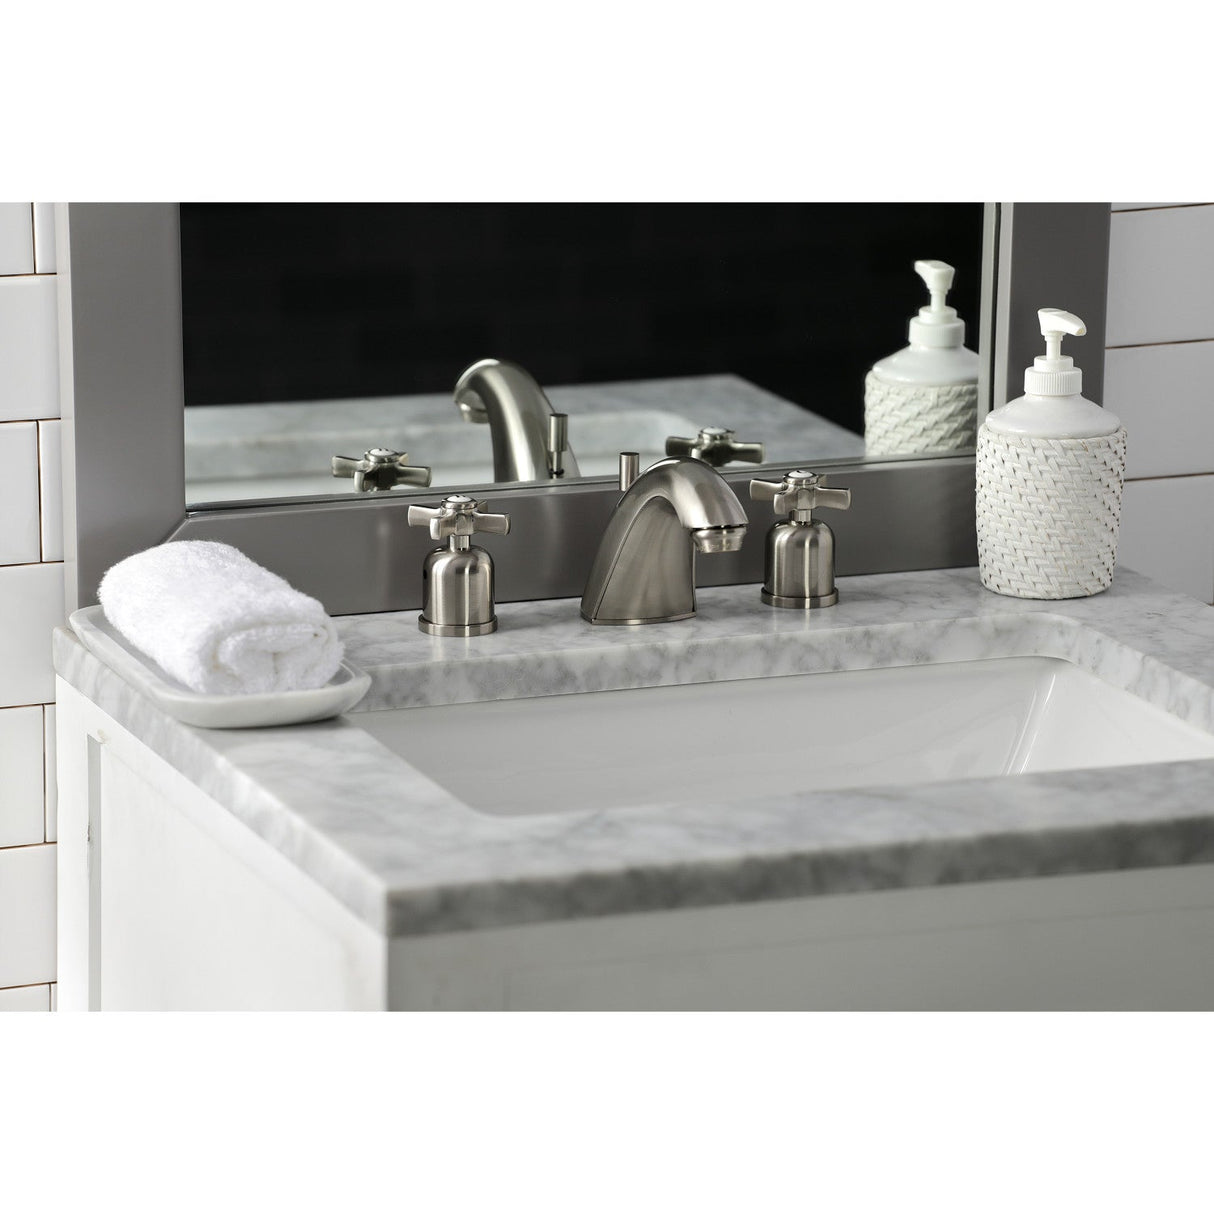 Millennium FB8958ZX Two-Handle 3-Hole Deck Mount Widespread Bathroom Faucet with Plastic Pop-Up, Brushed Nickel